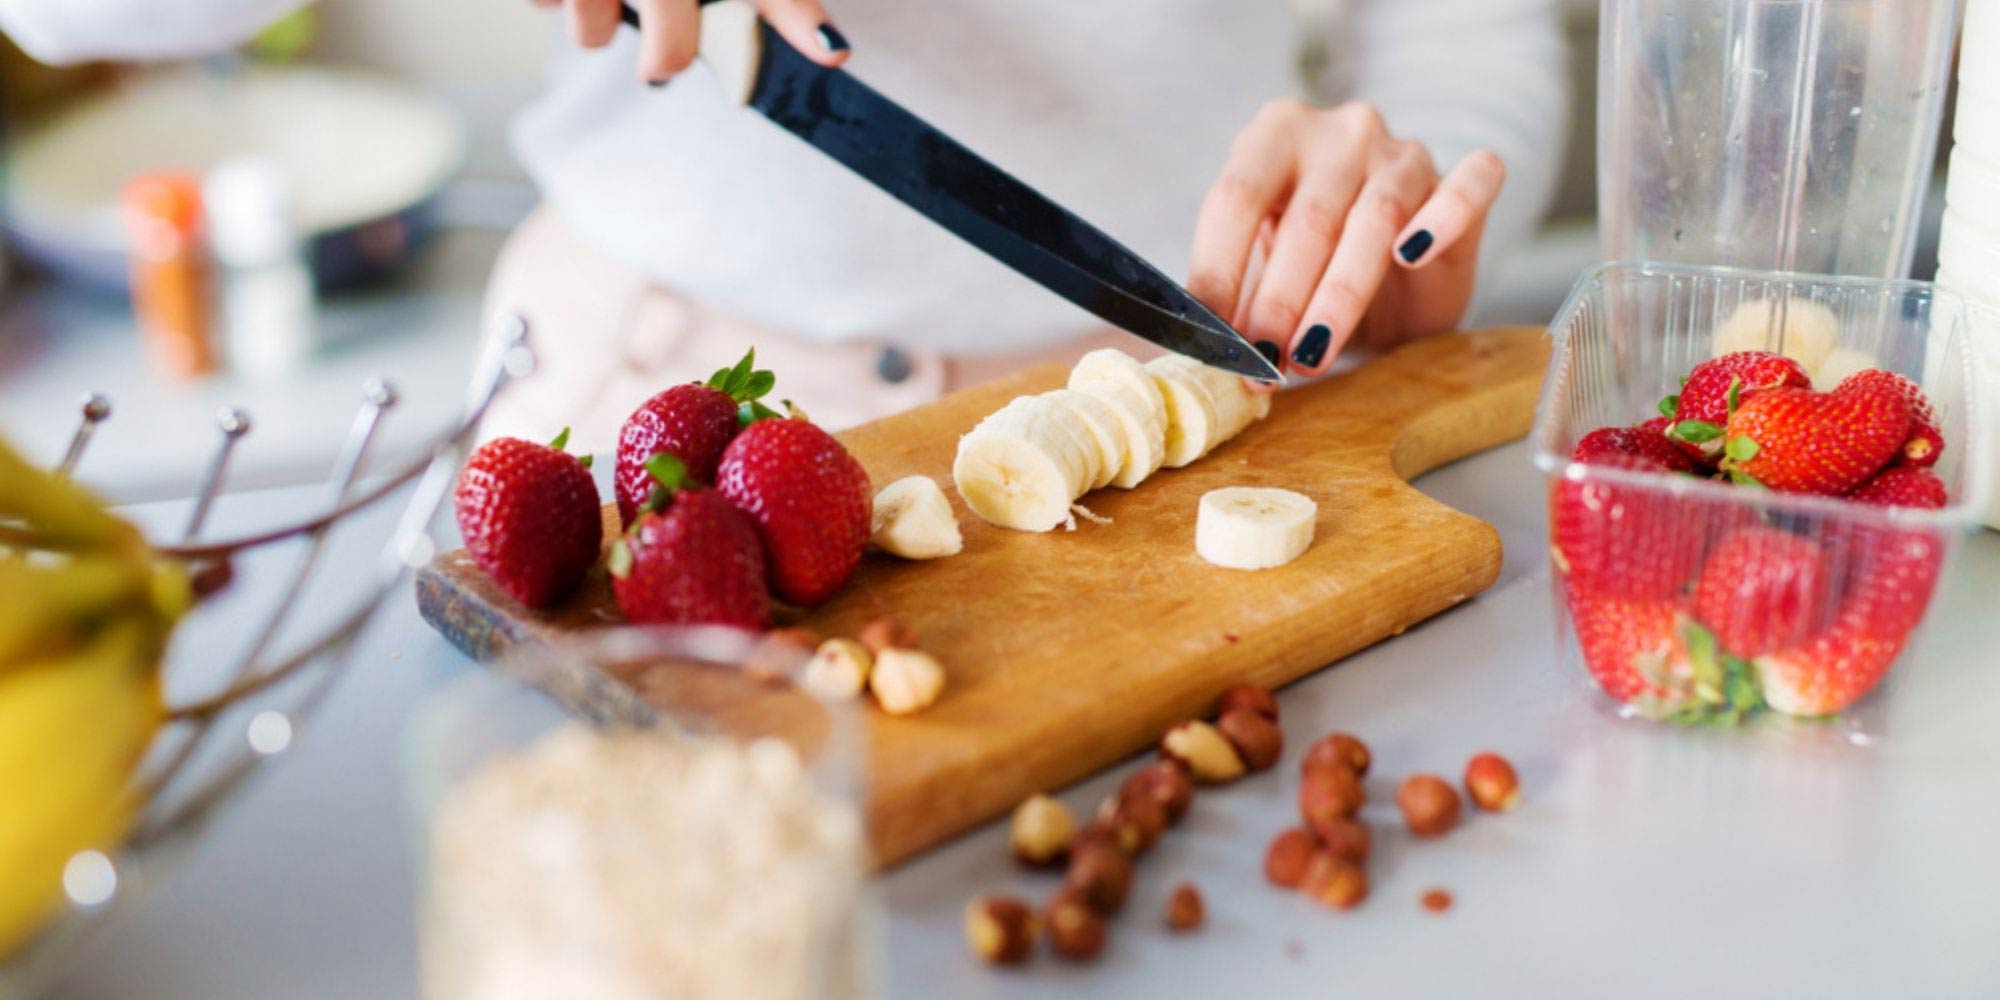 woman cutting a banana on a wooden cutting board next to strawberries, nuts, and a bowl of fruit